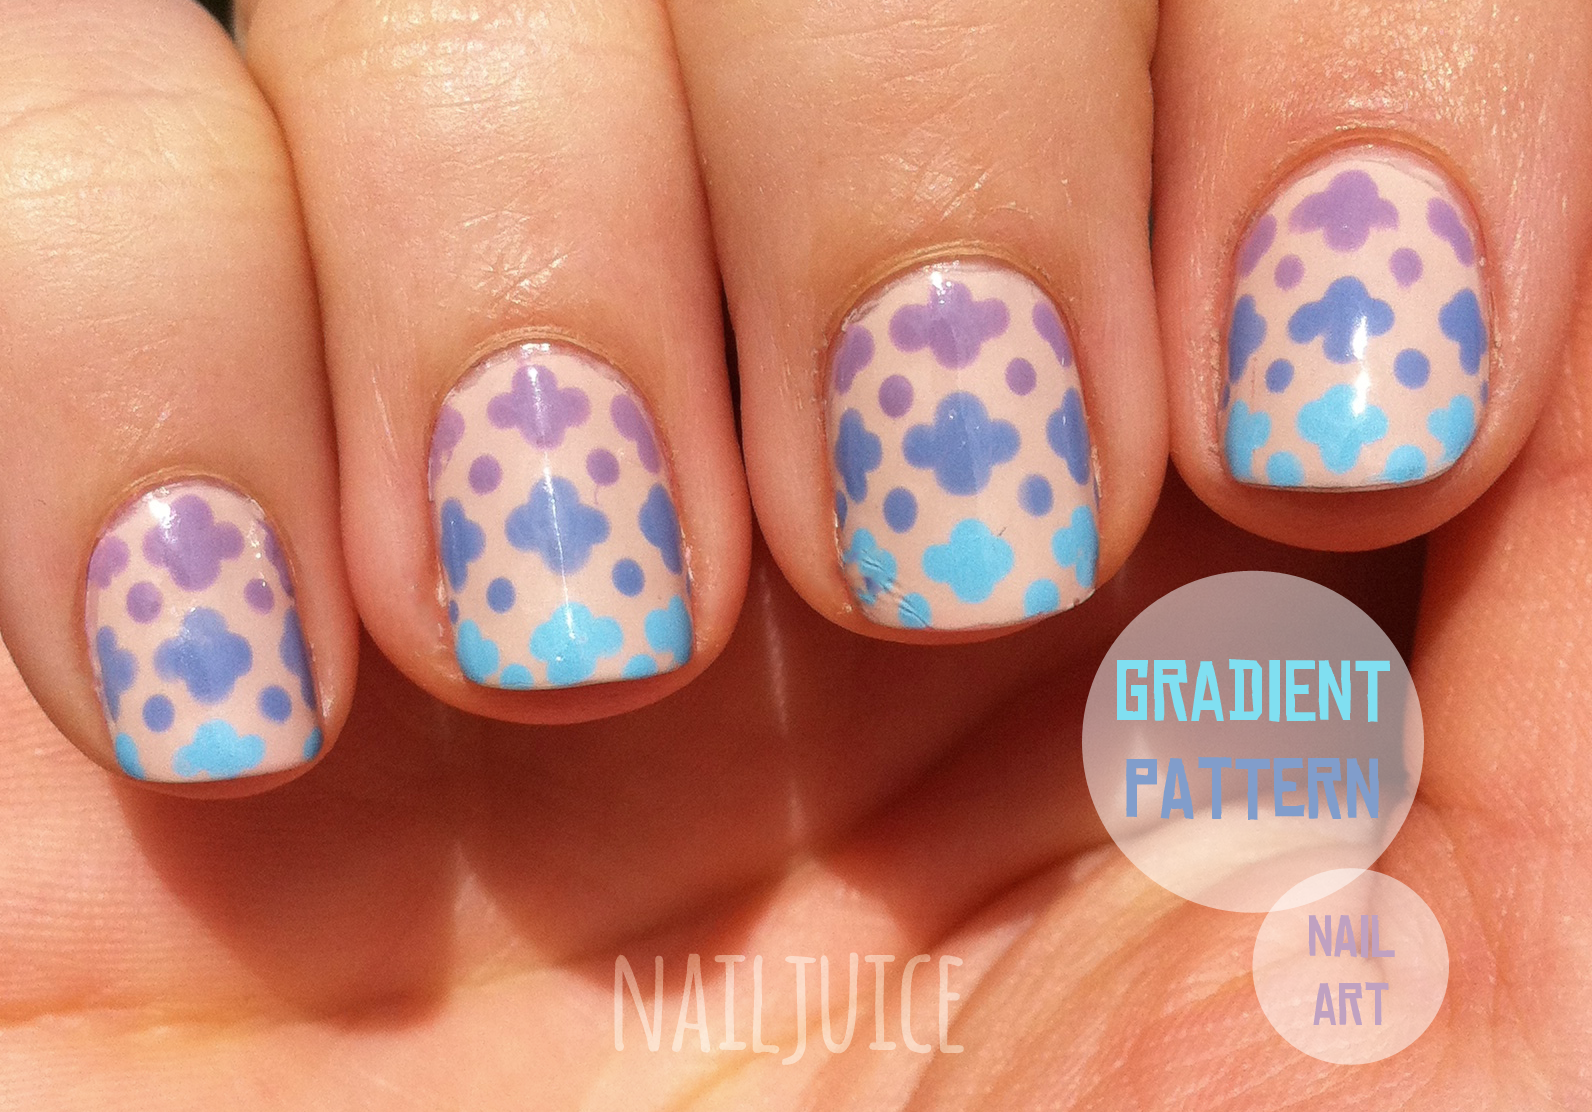 Scale Gradient Nail Art - wide 2